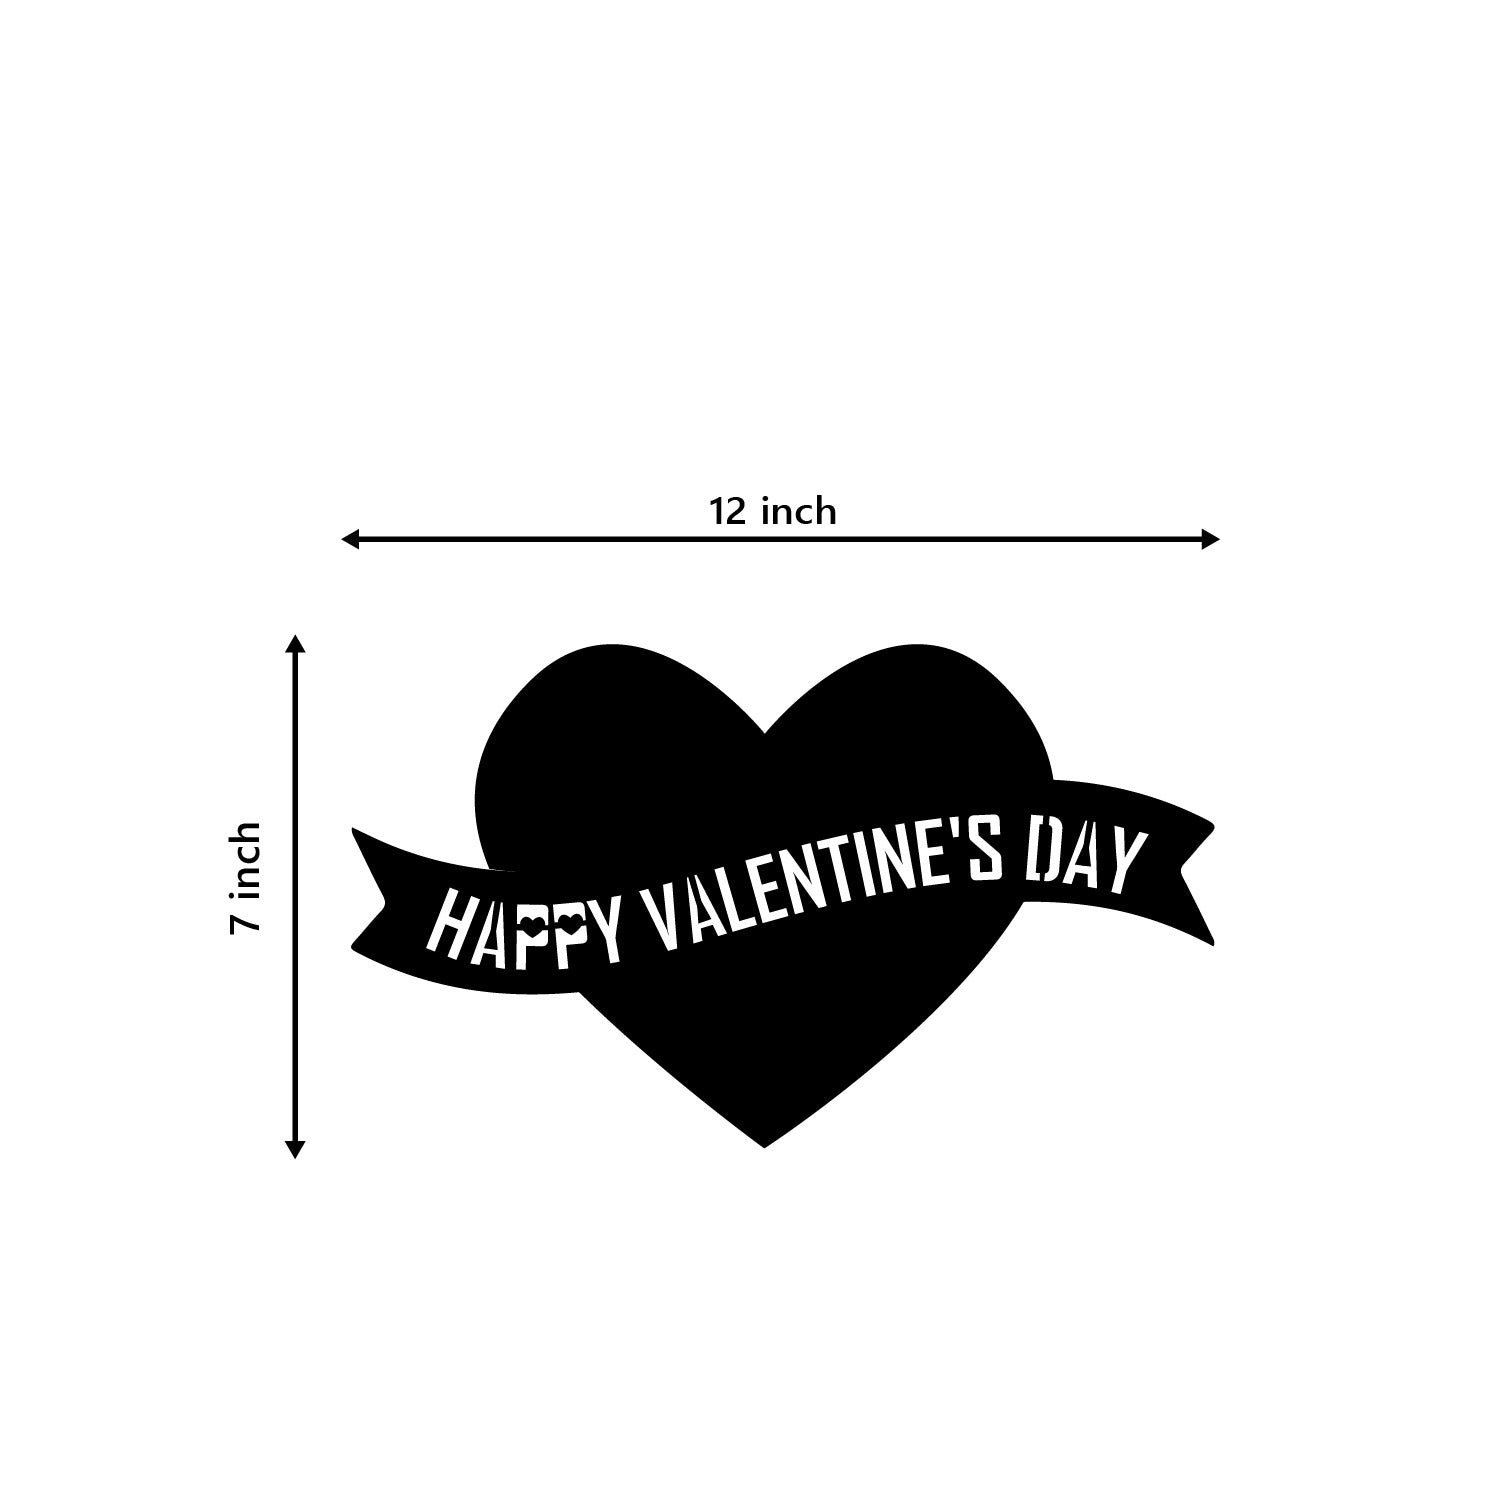 "Happy Valentine's Day" Black Engineered Wood Wall Art Cutout, Ready to Hang Home Decor 3